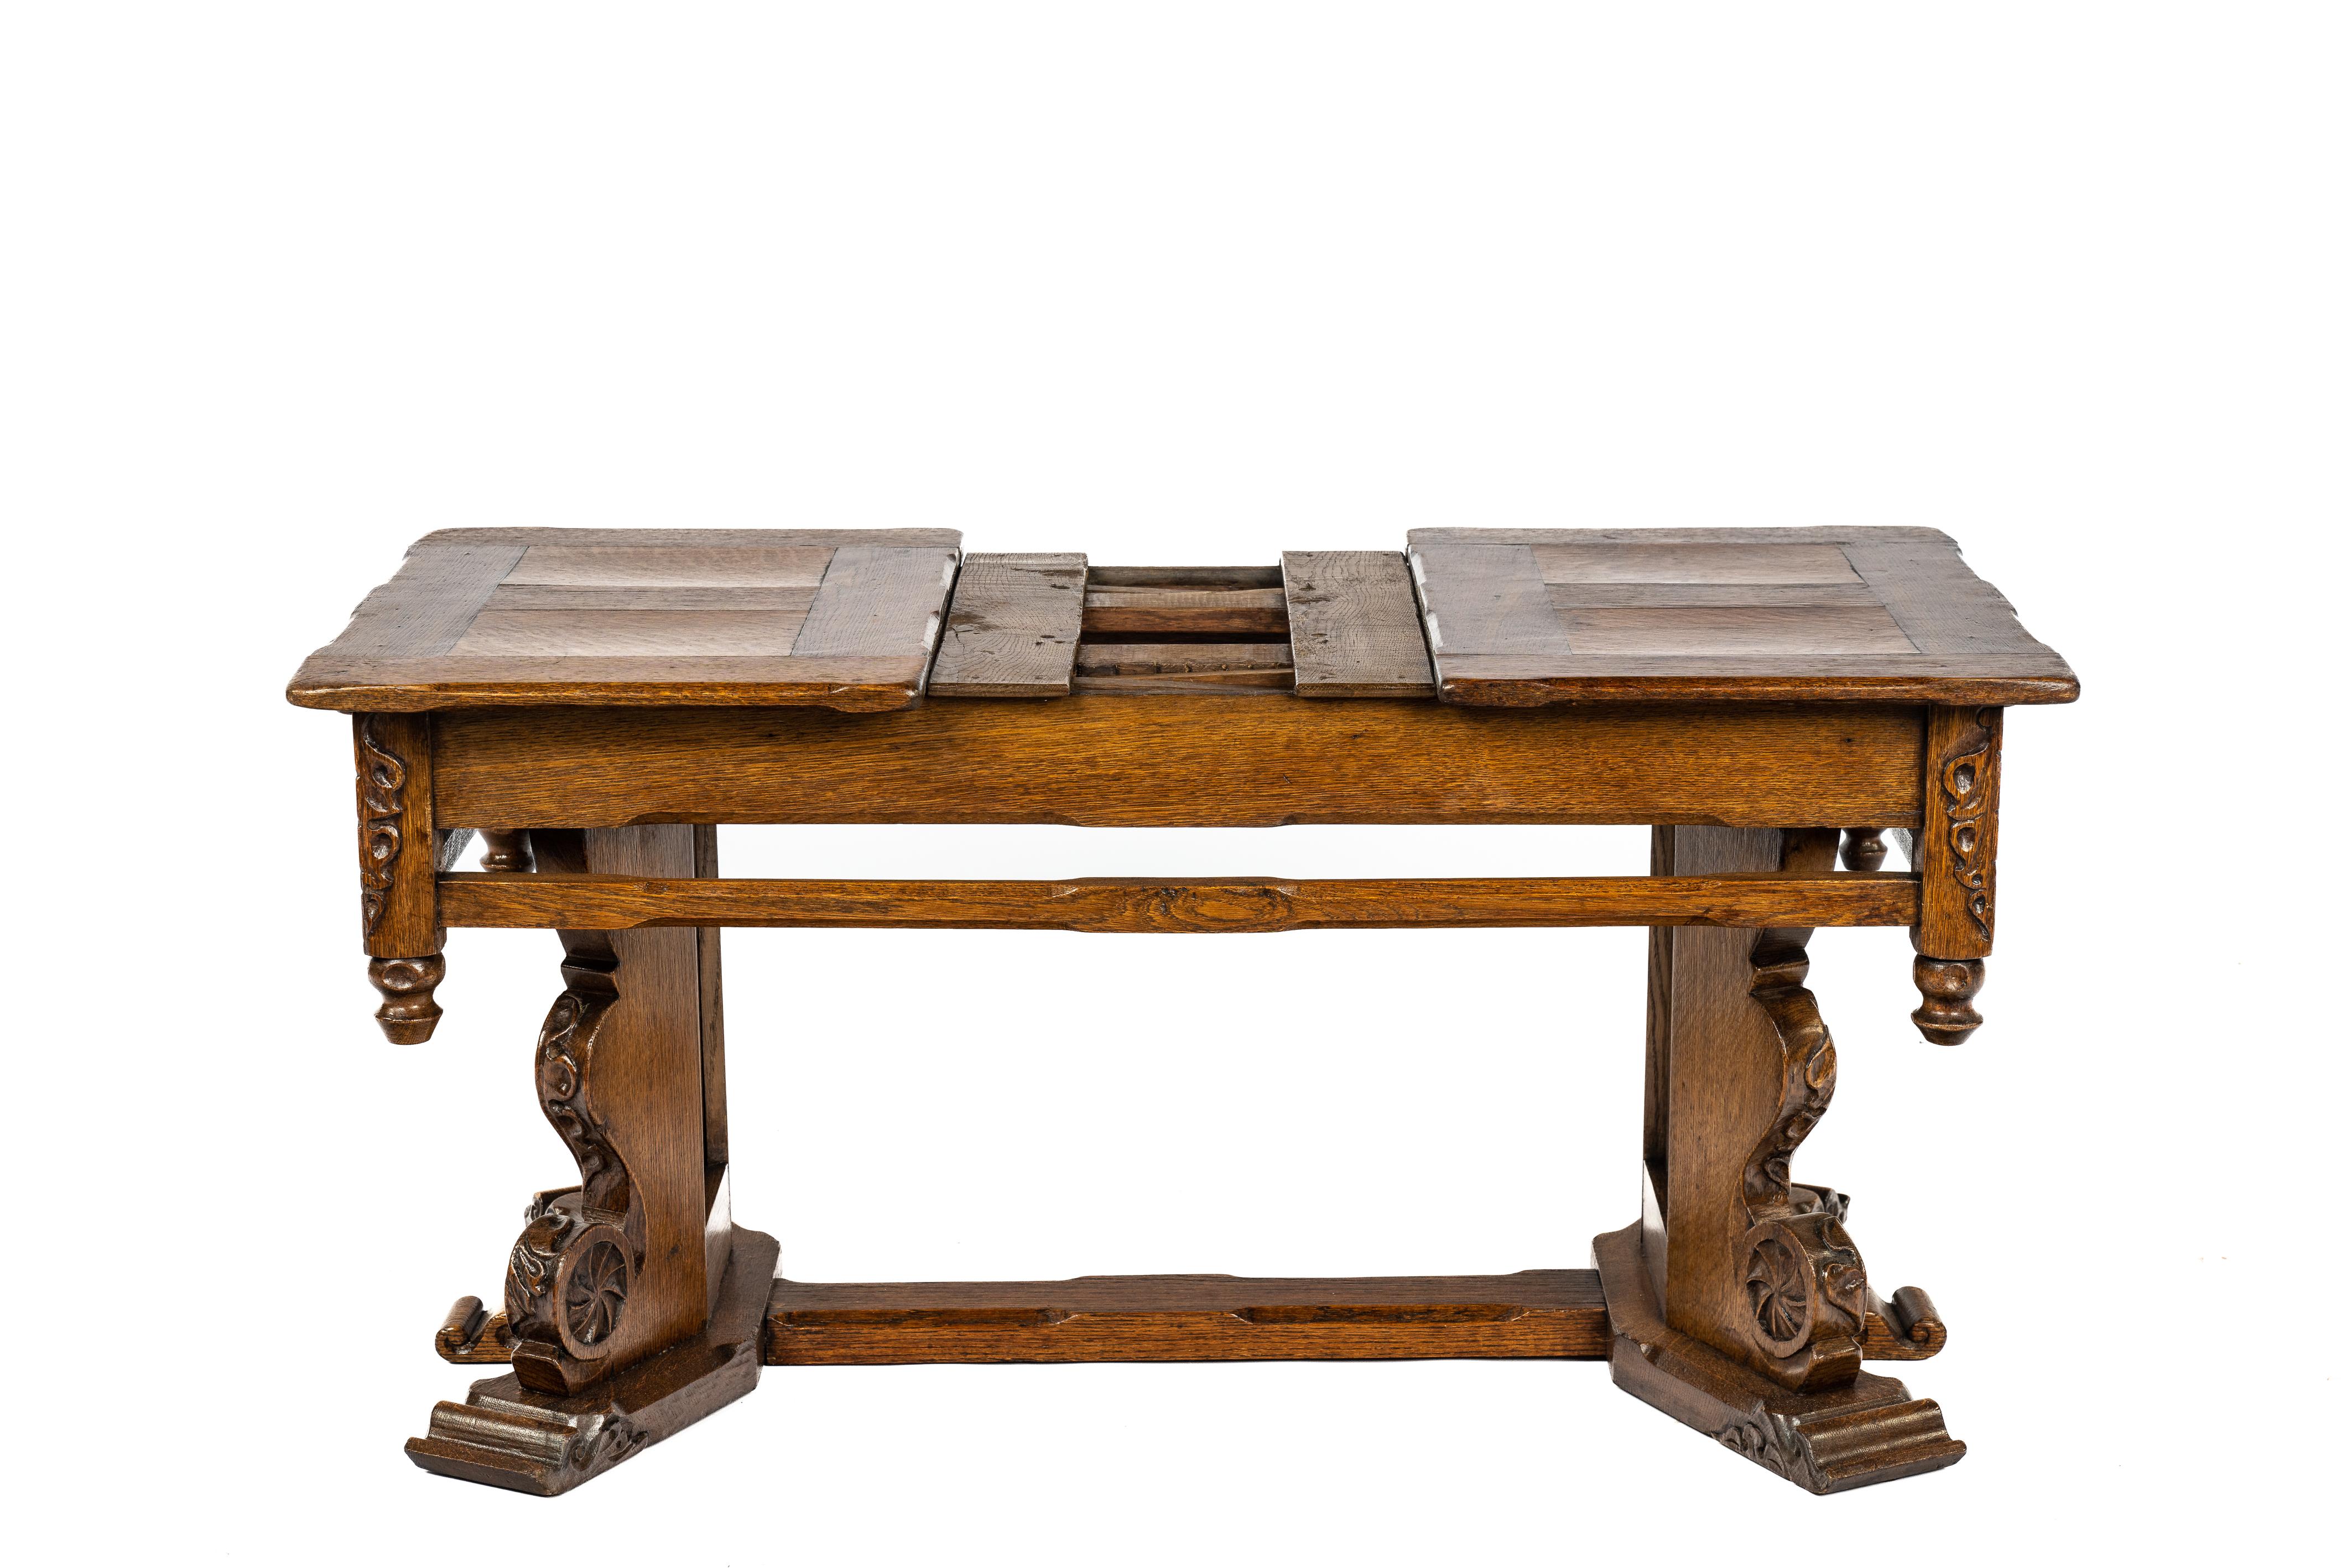 Vintage European Solid Oak Extendable Warm Honey Color Carved Coffee Table For Sale 2